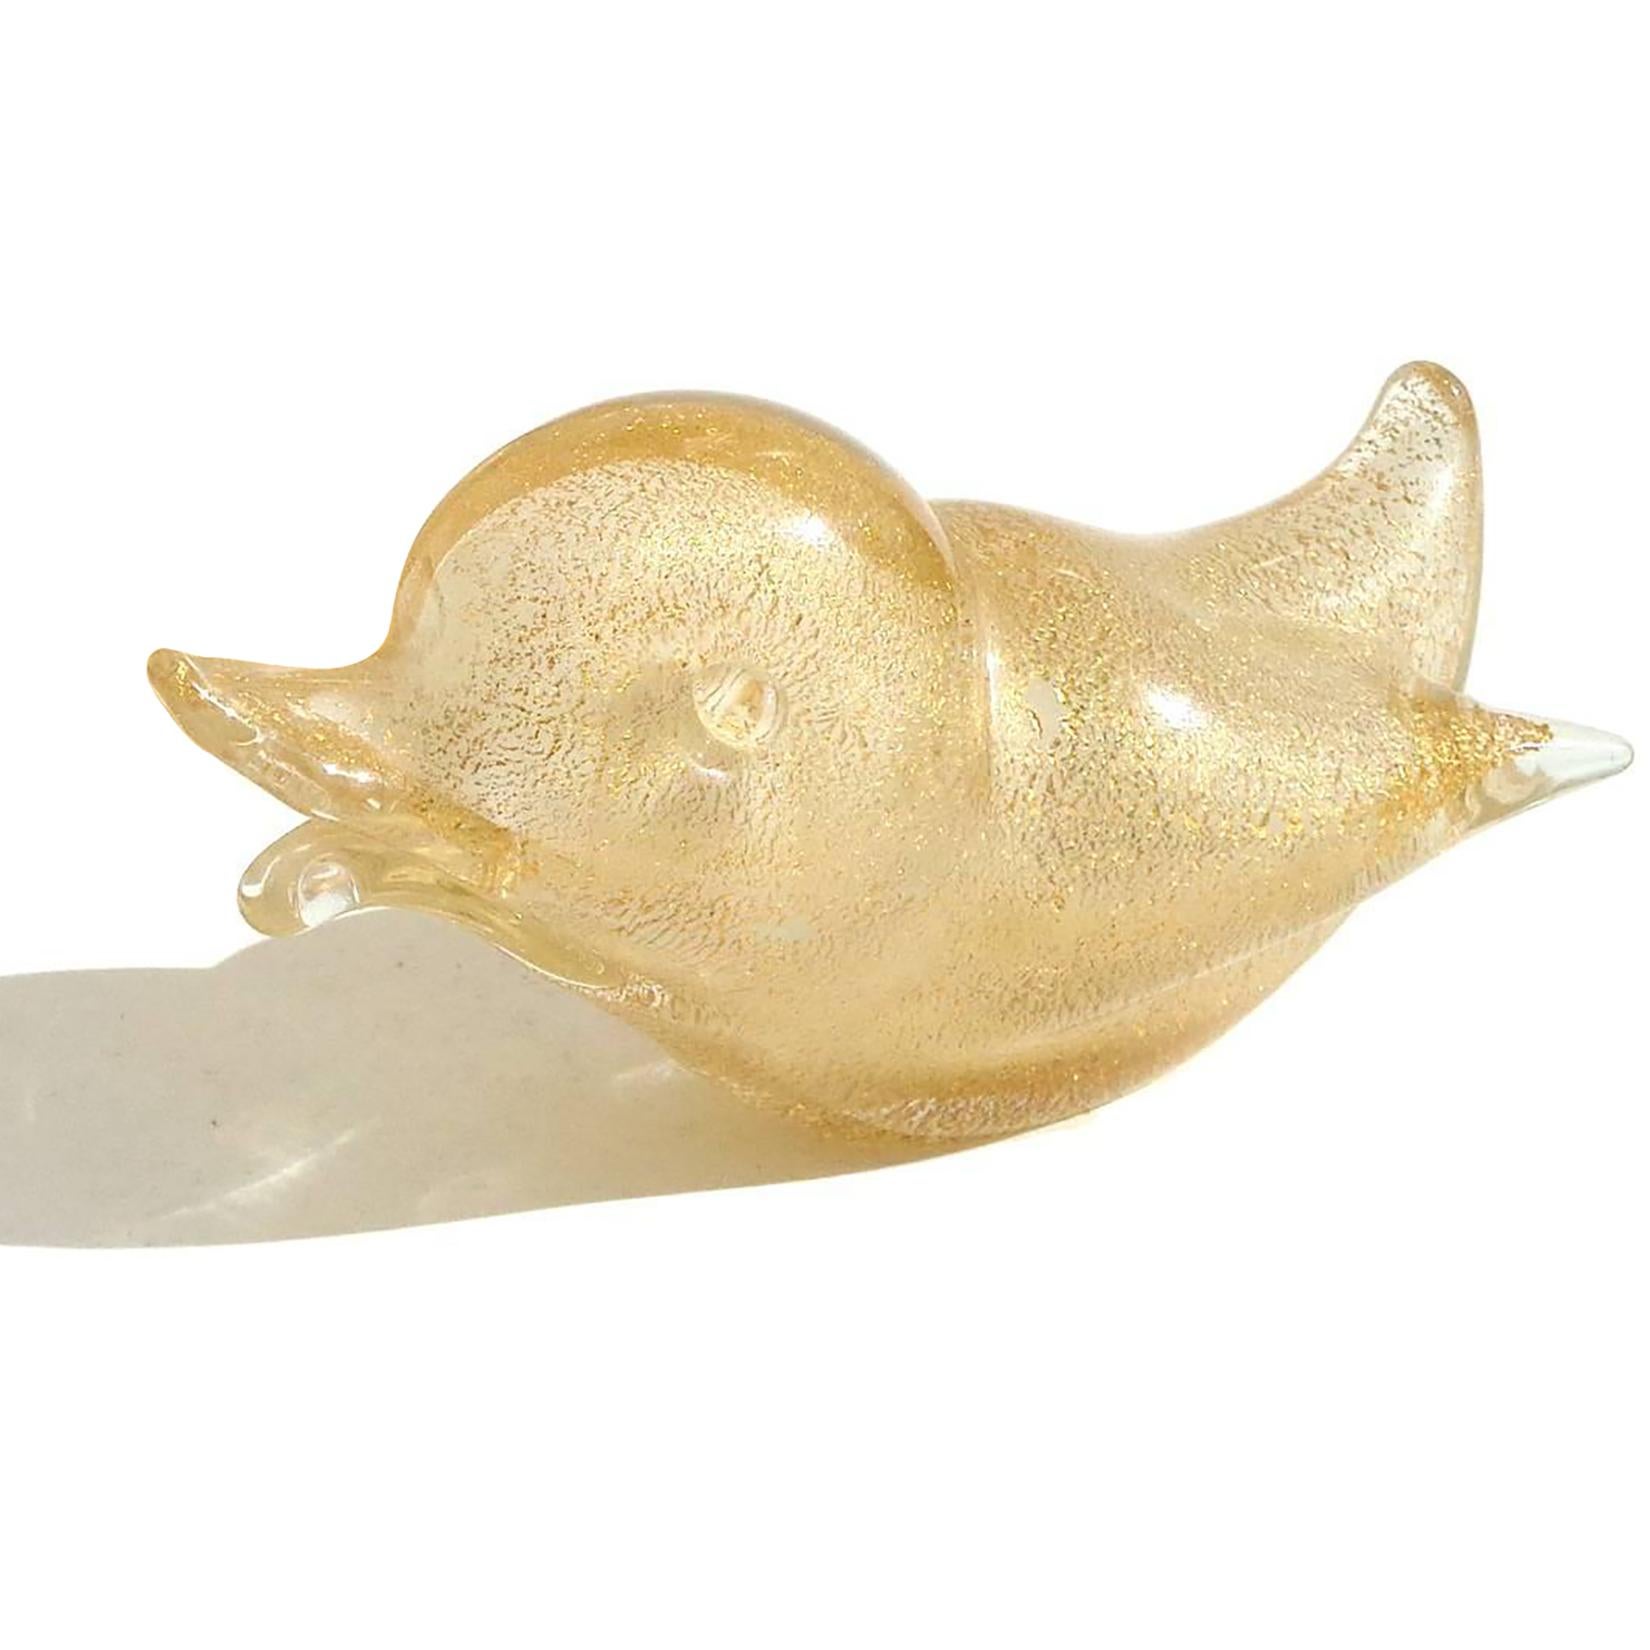 Beautiful vintage Murano hand blown white and gold flecks Italian art glass baby bird sculpture. Documented to designer Archimede Seguso, with original label underneath. The figurine is profusely covered in gold leaf. Could be used as a paperweight.